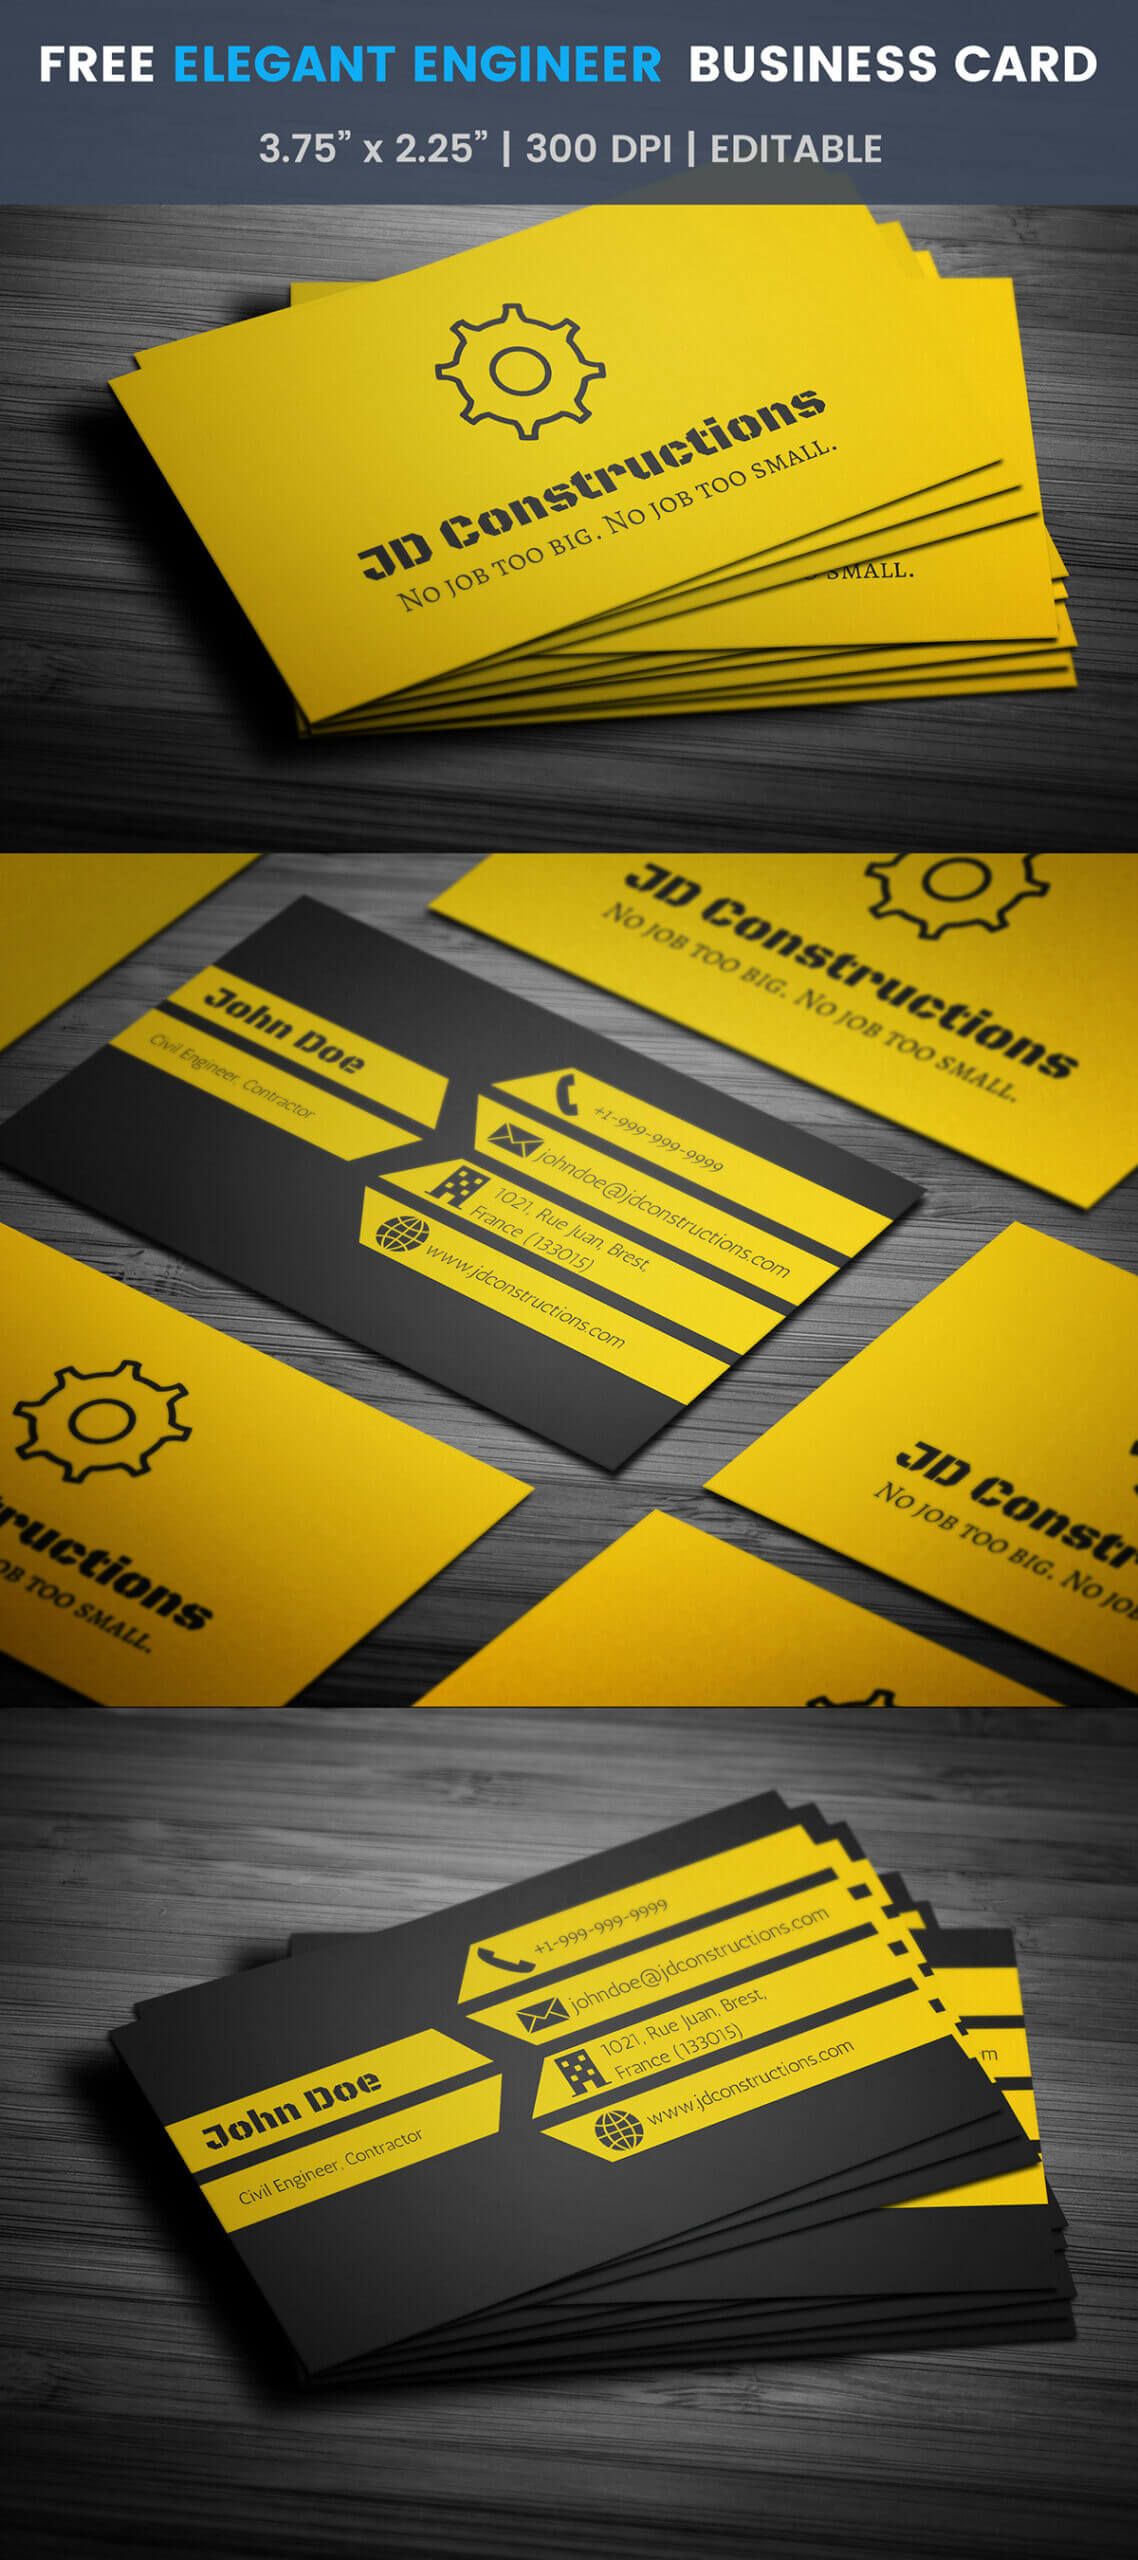 008 Template Ideas Construction Business Card Free On With Regard To Construction Business Card Templates Download Free